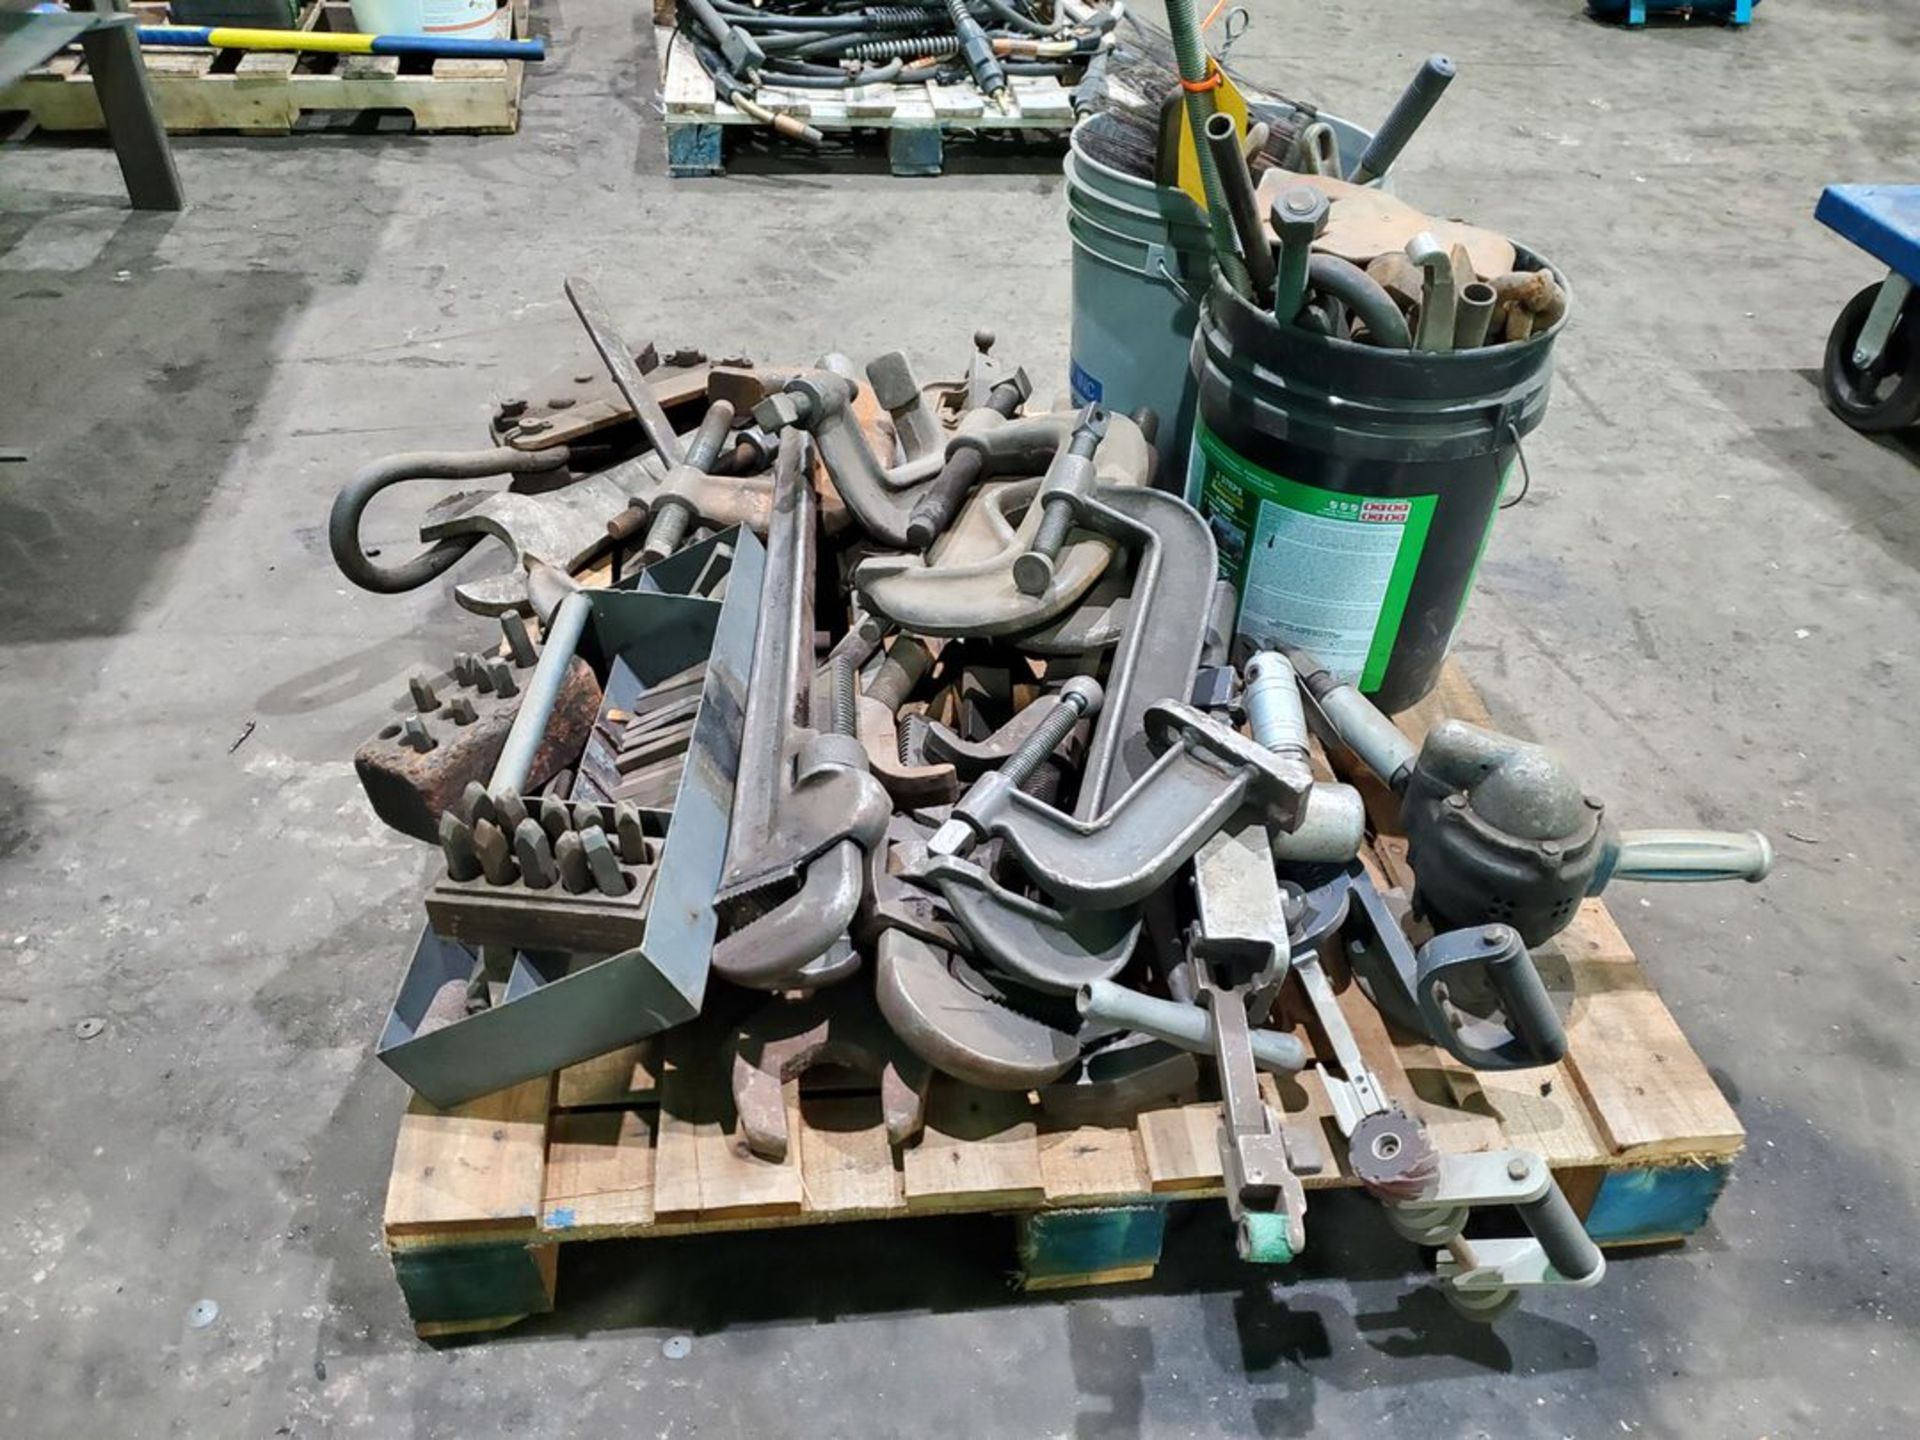 Assorted Material To Inlcude But Not Limited To: Hvy Duty C-Clamps, Assorted Hvy Duty 36" Wrenches, - Image 7 of 15